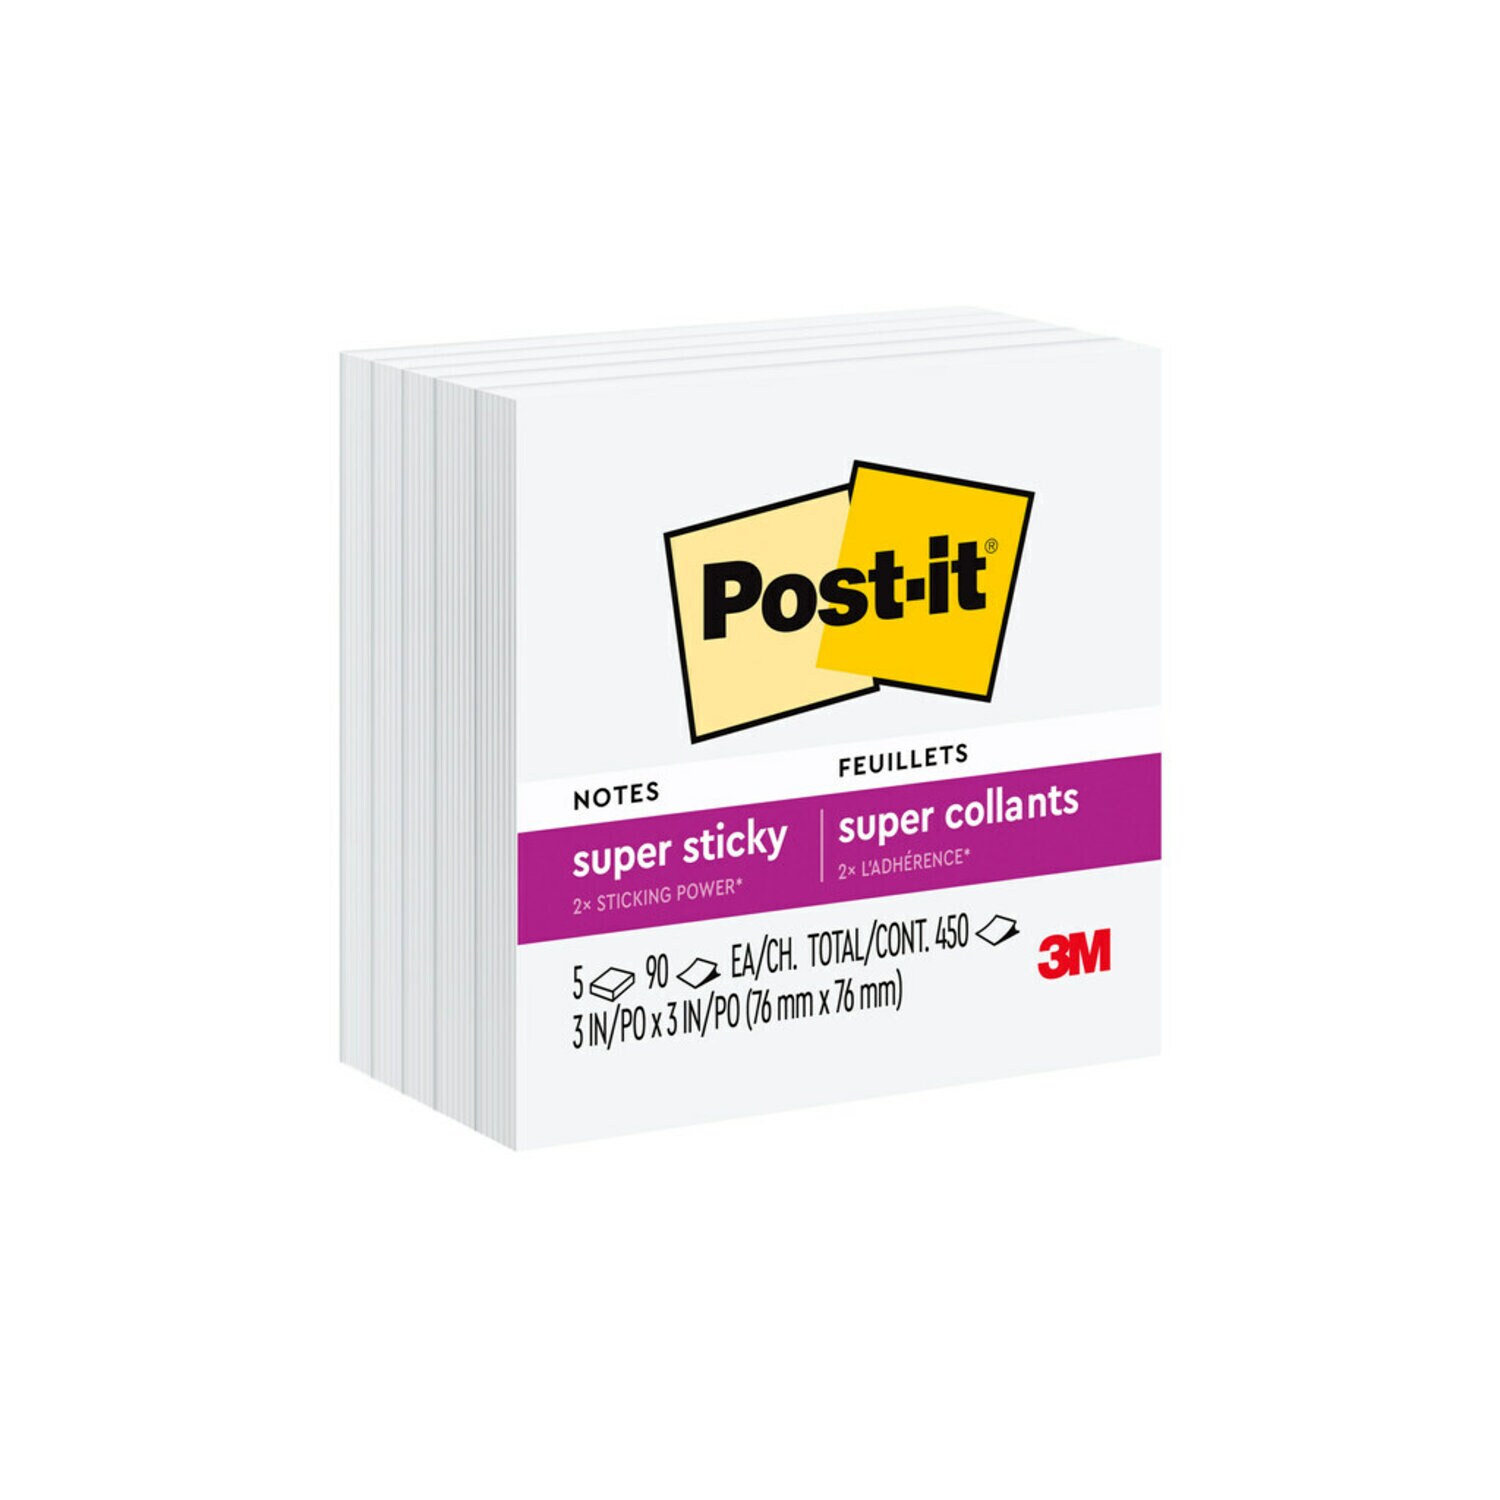 7010371217 - Post-it Super Sticky Notes 654-5SSW, 3 in x 3 in (76 mm x 76 mm),
White, 5 Pads/Pack, 90 Sheets/Pad